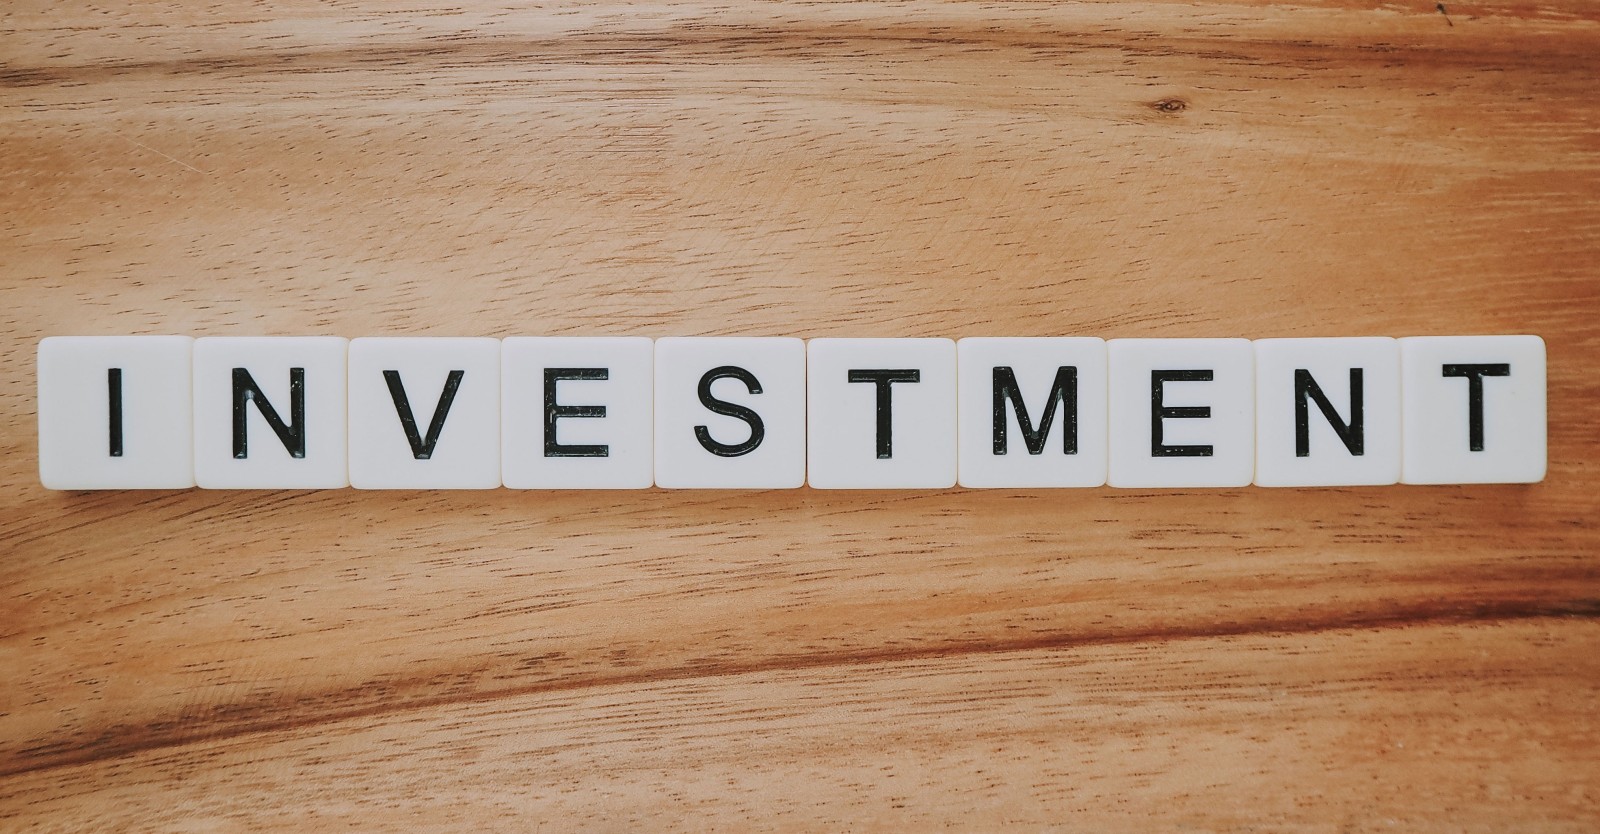 Scrabble tiles which read "INVESTMENT"